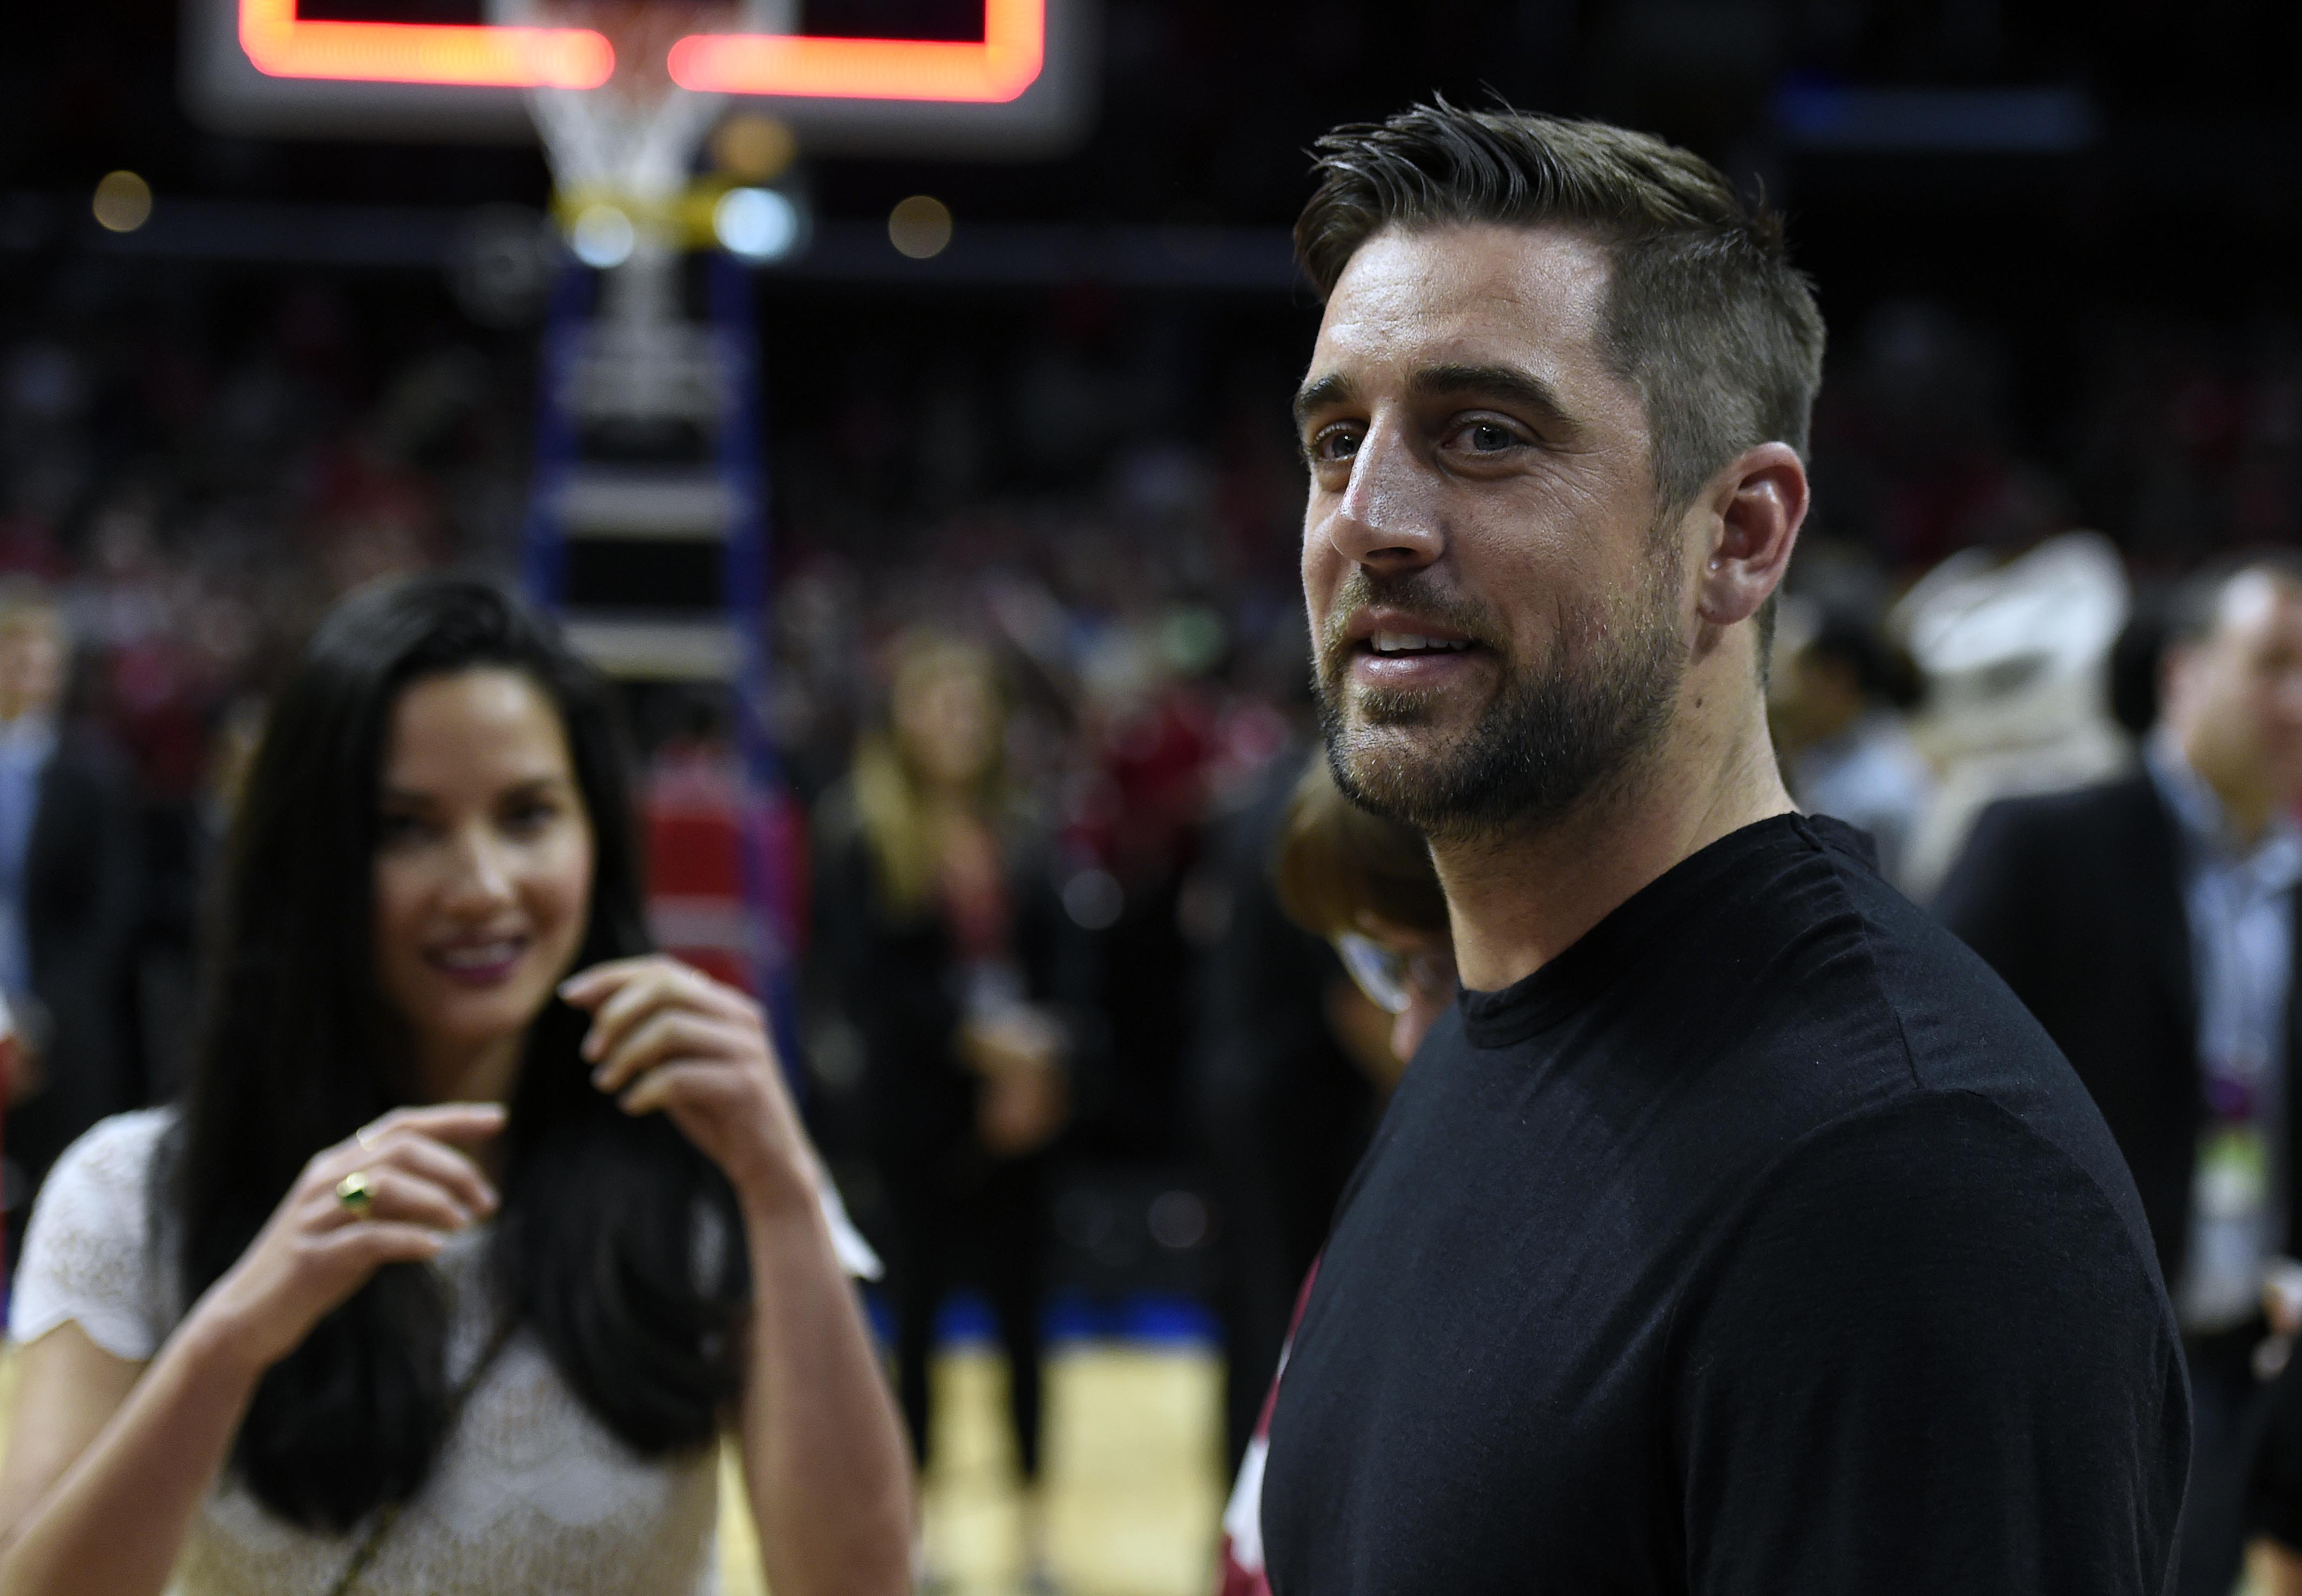 Mar 28, 2015; Los Angeles, CA, USA; Green Bay Packers quarterback Aaron Rodgers and film actress Olivia Munn in attendance during the 85-78 Wisconsin Badgers victory against Arizona Wildcats in the finals of the west regional of the 2015 NCAA Tournament at Staples Center. (Robert Hanashiro-USA TODAY Sports)